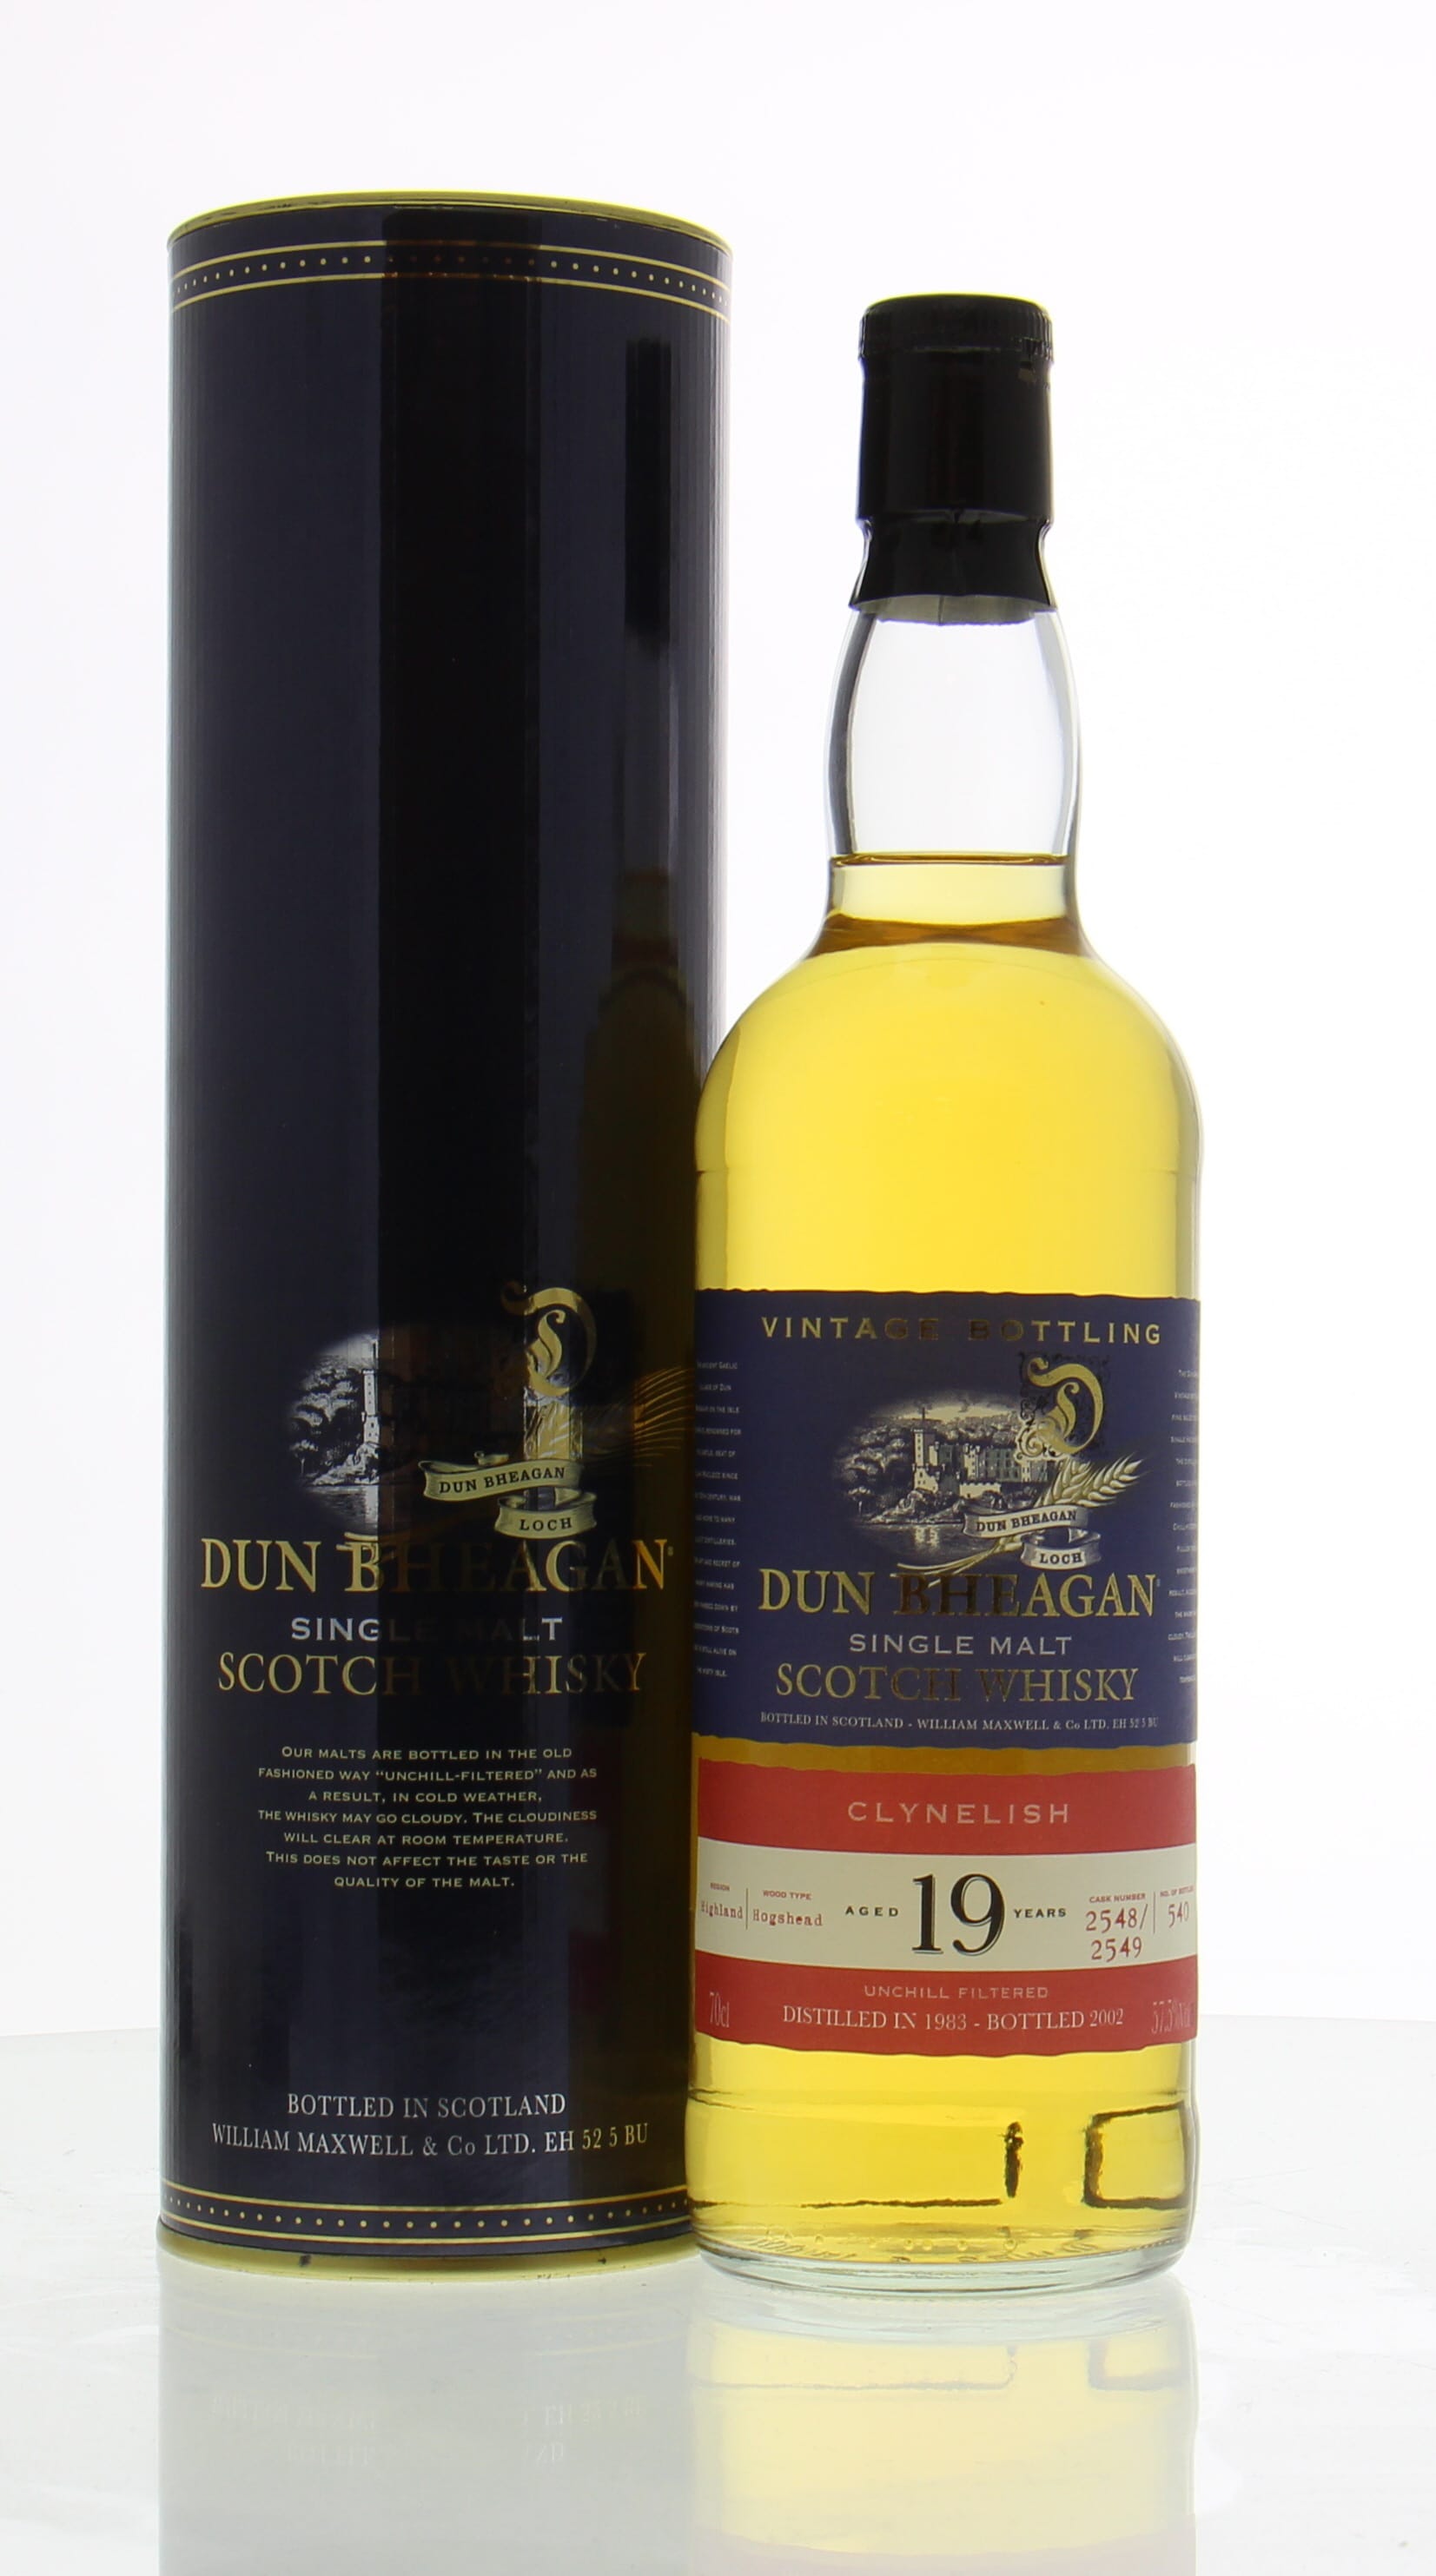 Clynelish - 19 Years Old Dun Bheagan Cask:2548/2549 57.5% 1983 In Original Container